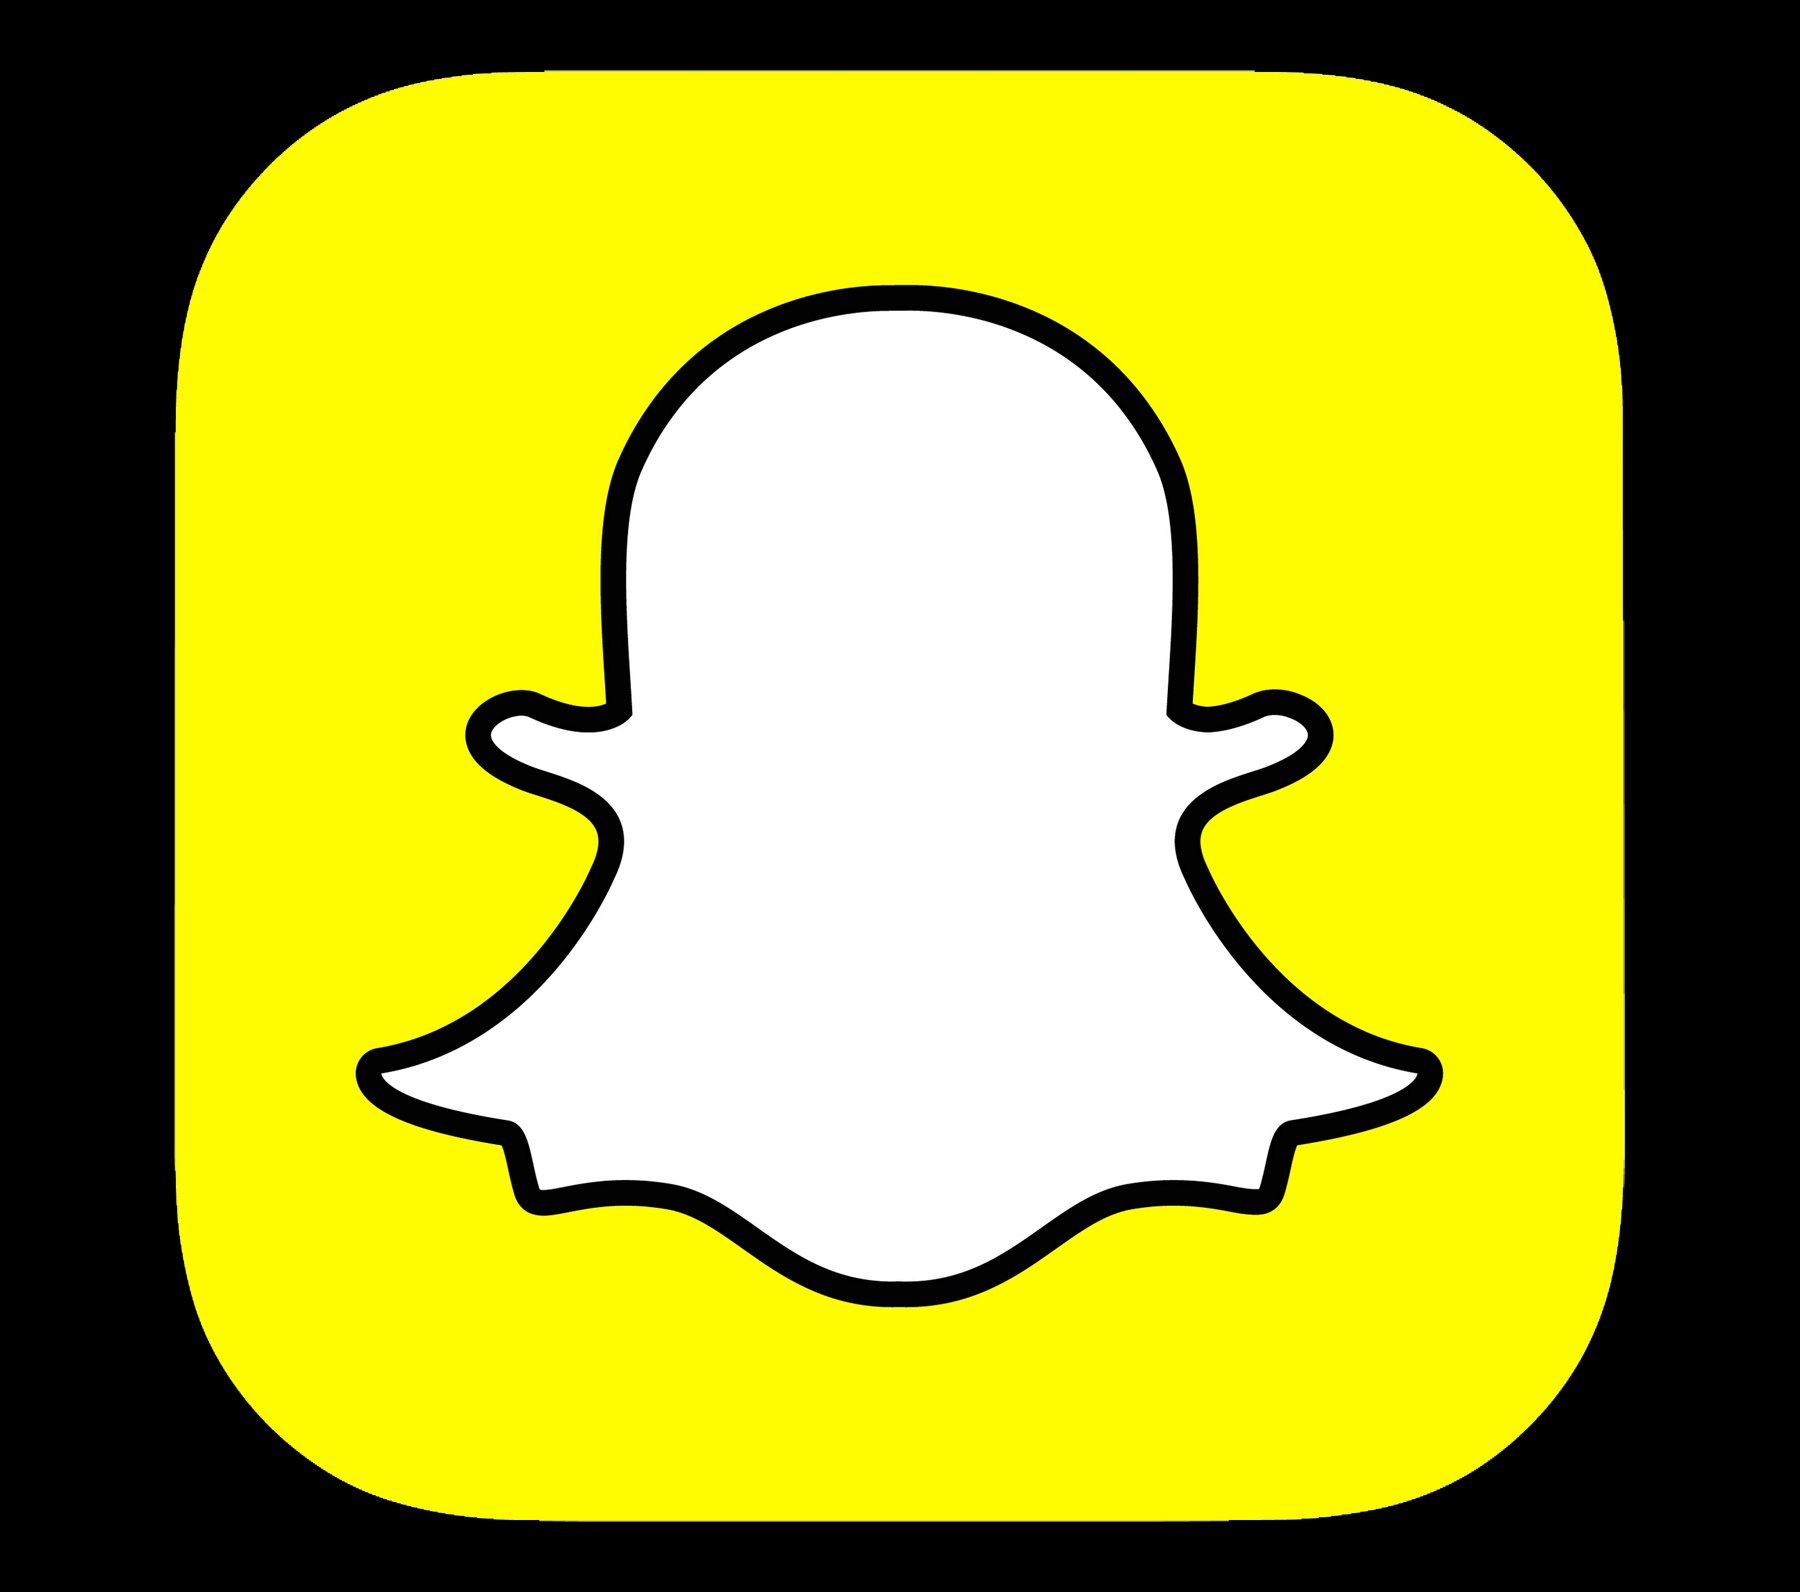 Snapchat Logo, symbol, meaning, History and Evolution